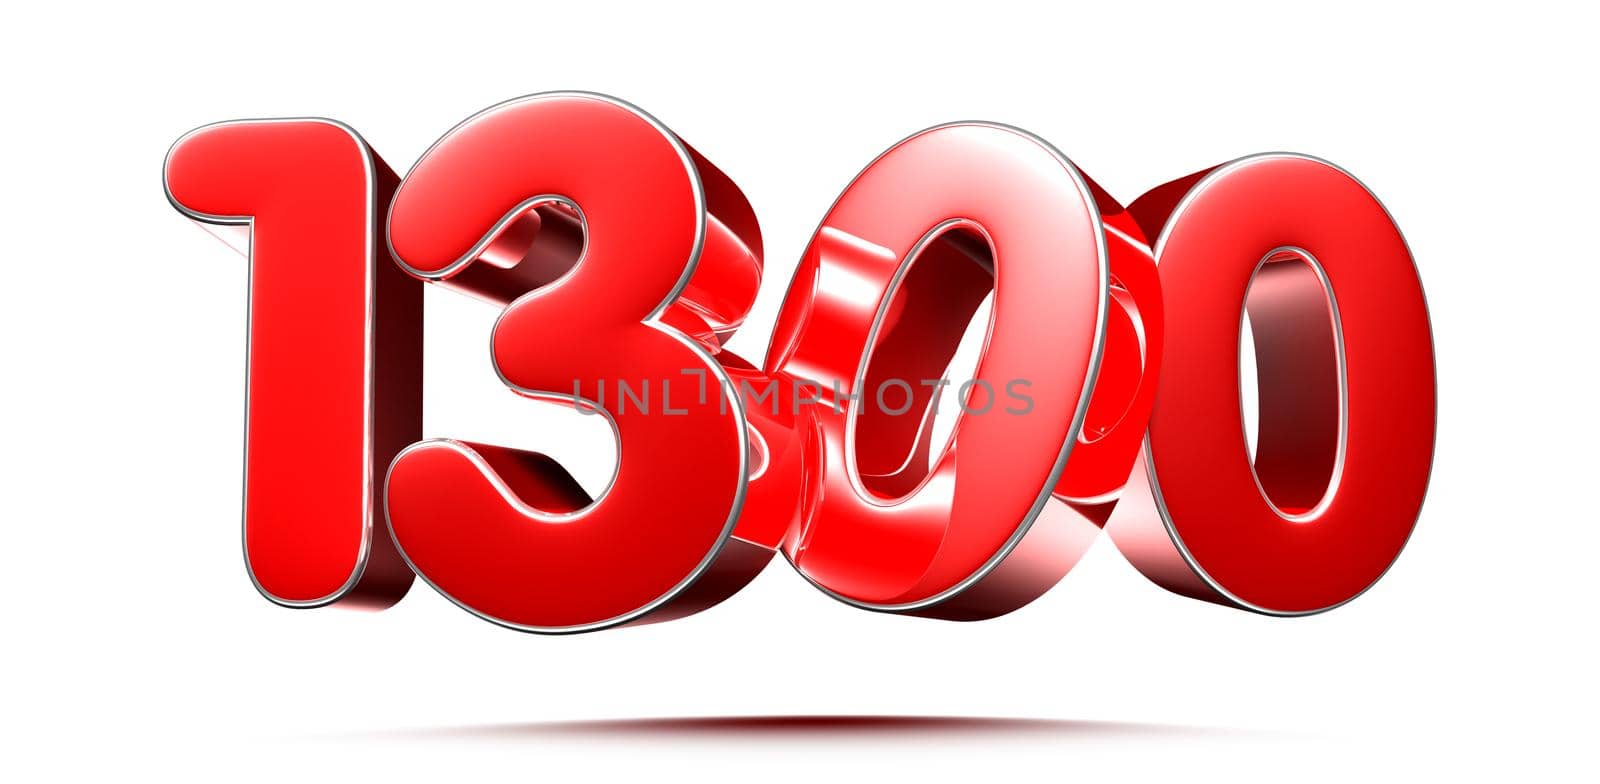 Rounded red numbers 1300 on white background 3D illustration with clipping path